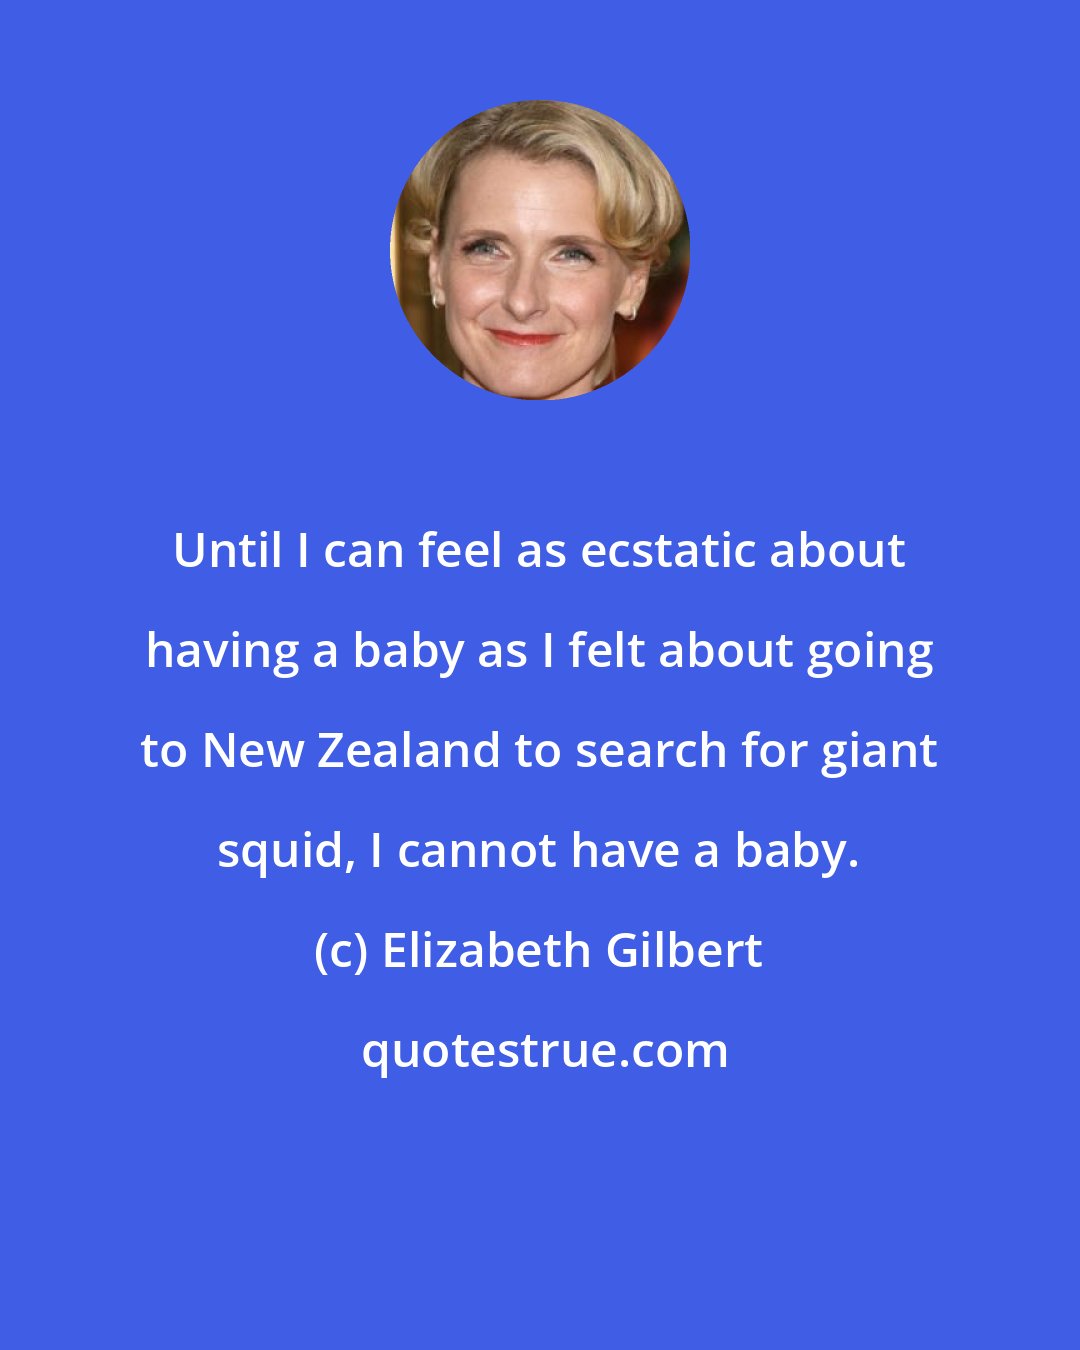 Elizabeth Gilbert: Until I can feel as ecstatic about having a baby as I felt about going to New Zealand to search for giant squid, I cannot have a baby.